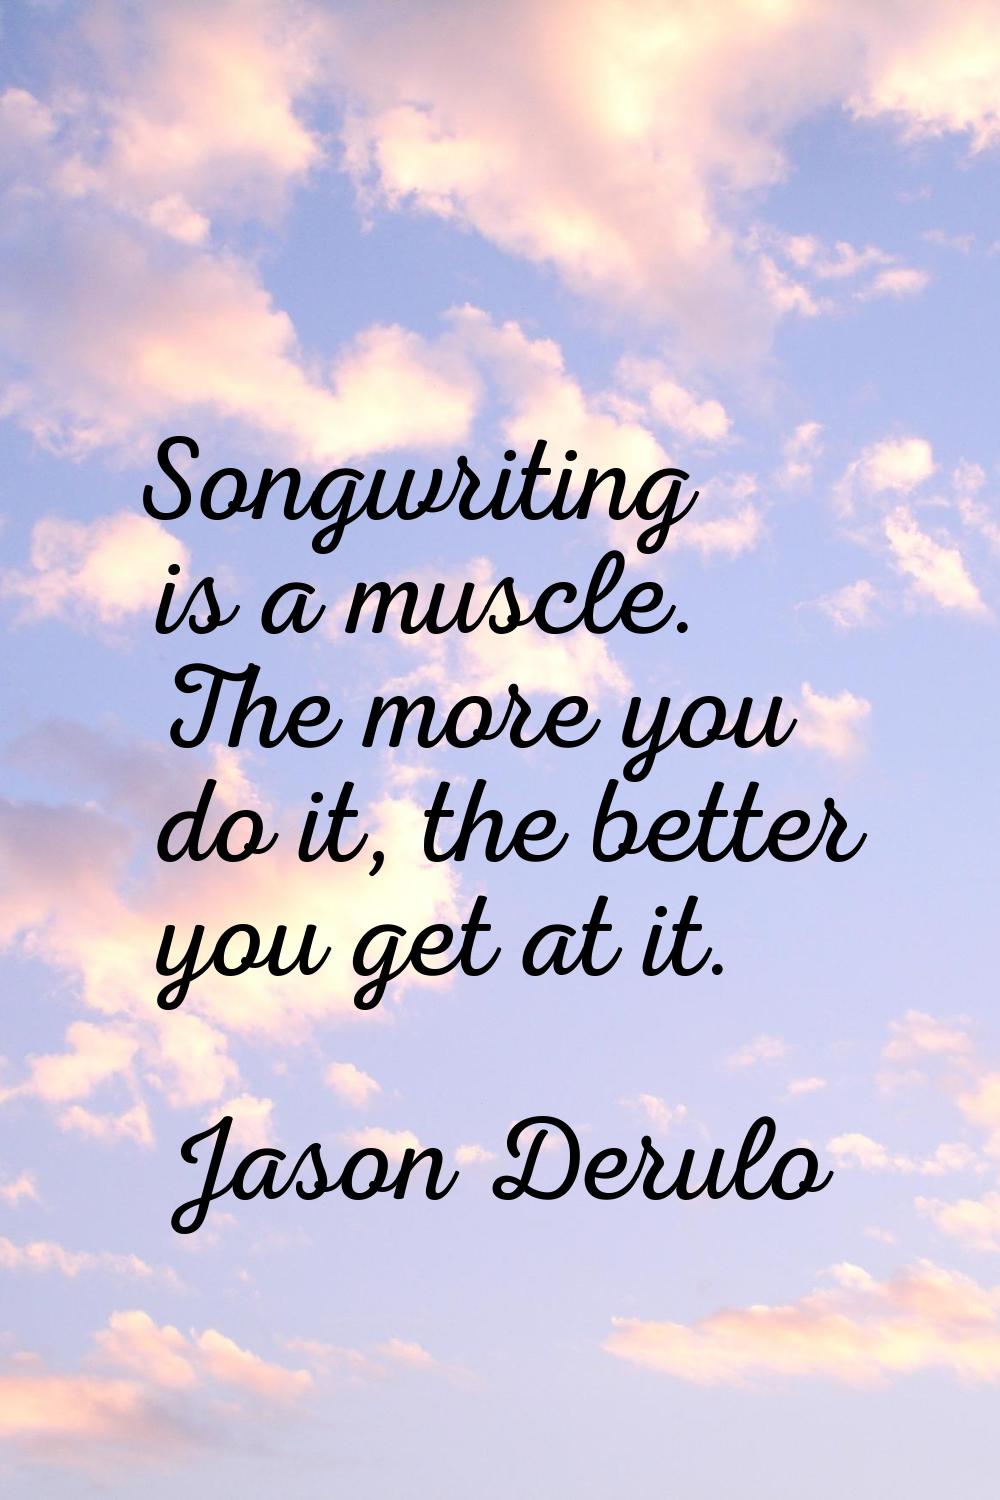 Songwriting is a muscle. The more you do it, the better you get at it.